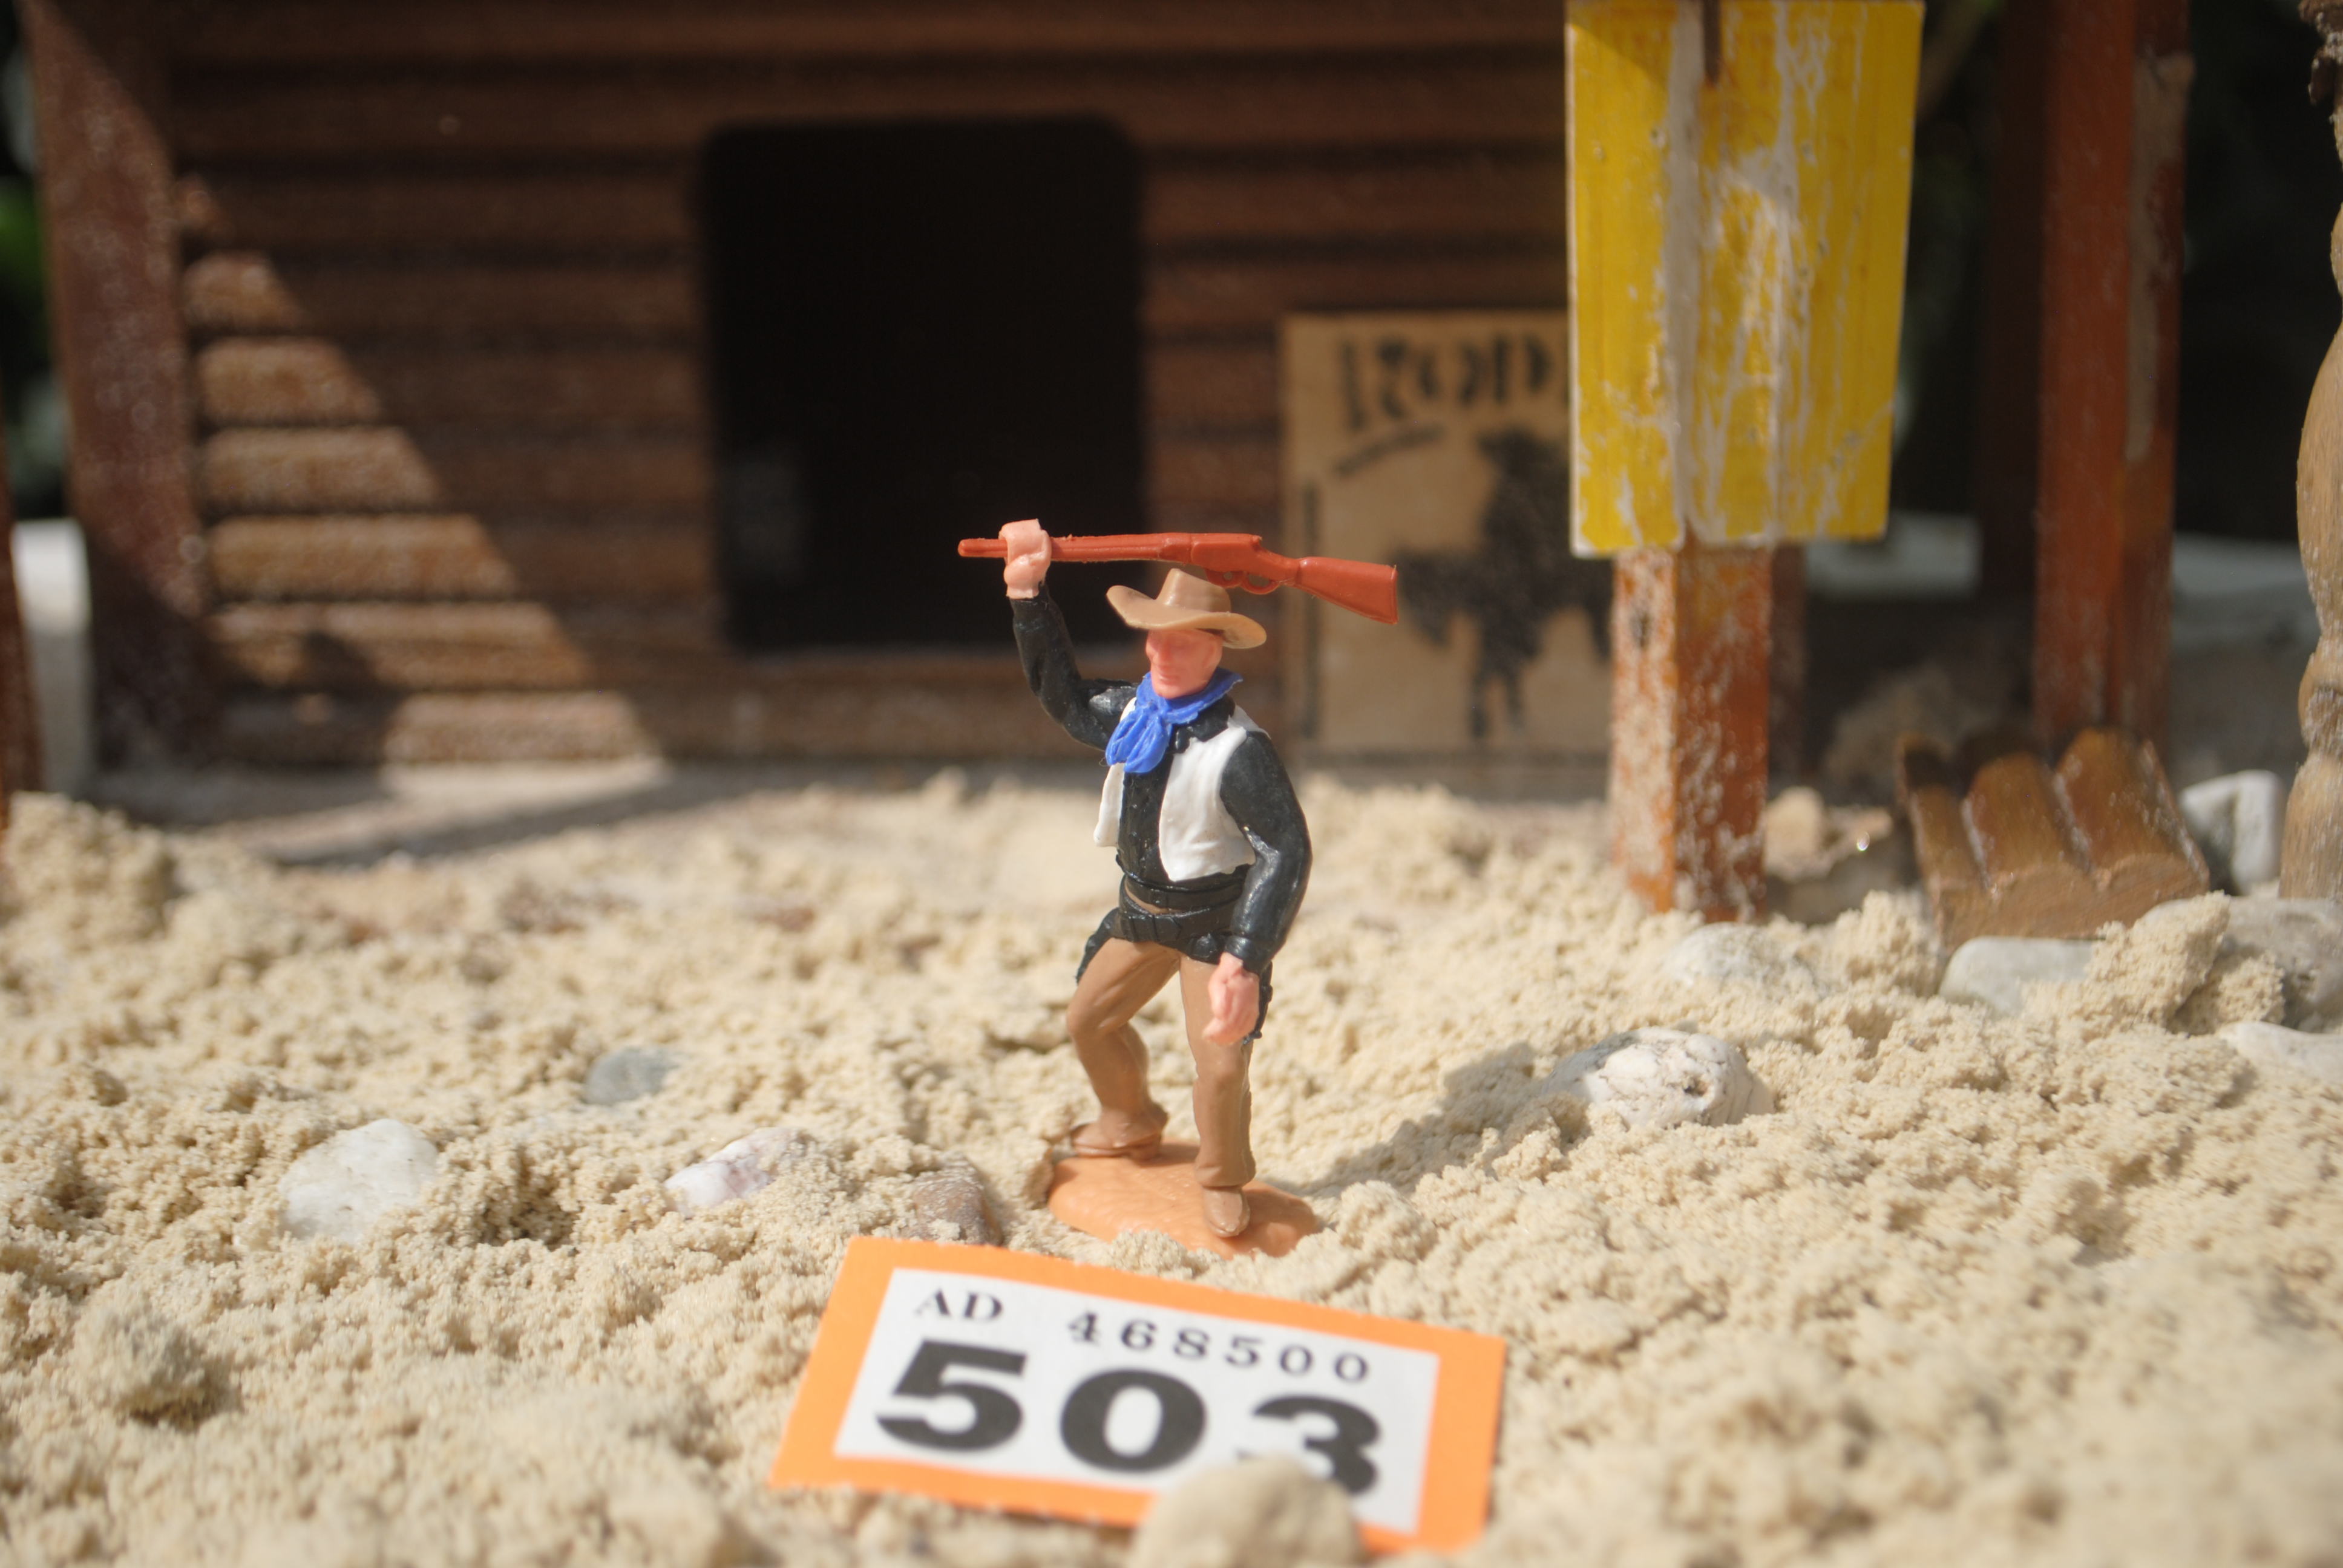 Timpo Toys O.503 Cowboy Standing 2nd version